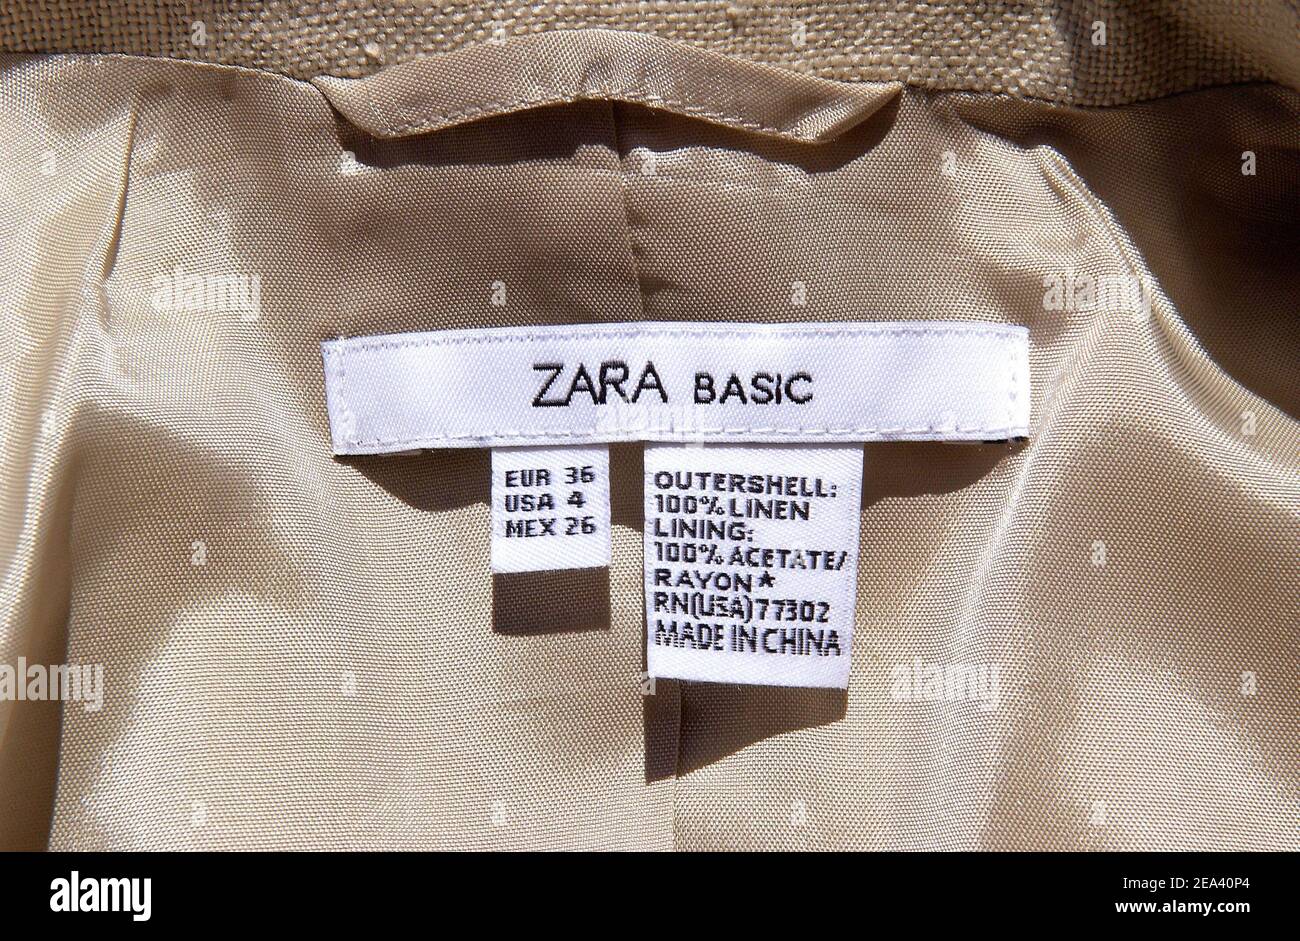 Made in China' labels on 'Zara Basic' garments. European Union member  states are gearing up to press Brussels for emergency measures leading to a  fast-track application of limits on booming textile imports